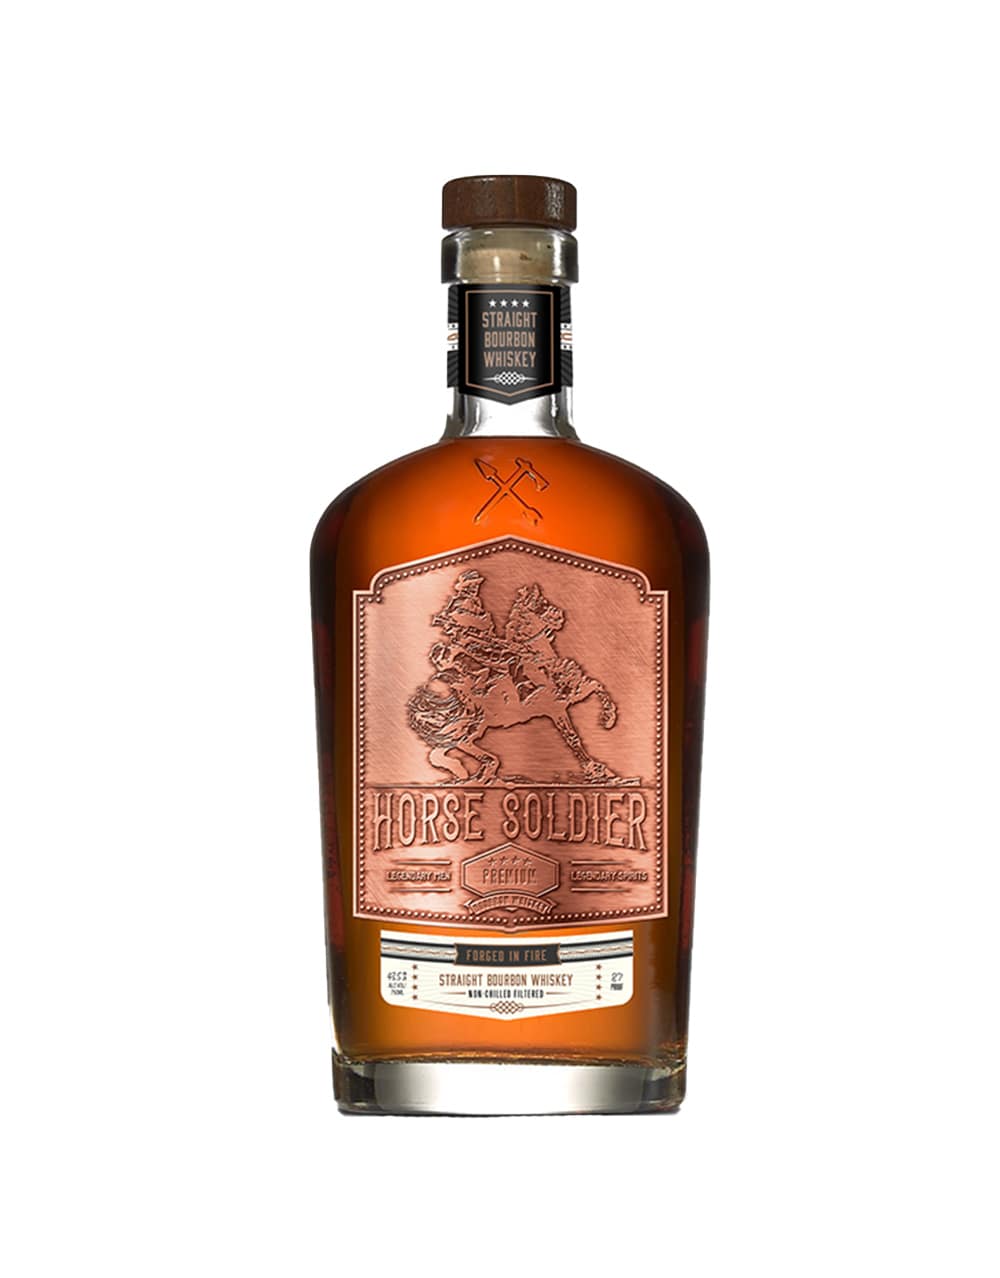 Canadian Club Chronicles 43 year old No. 3  Limited Release Canadian Whisky